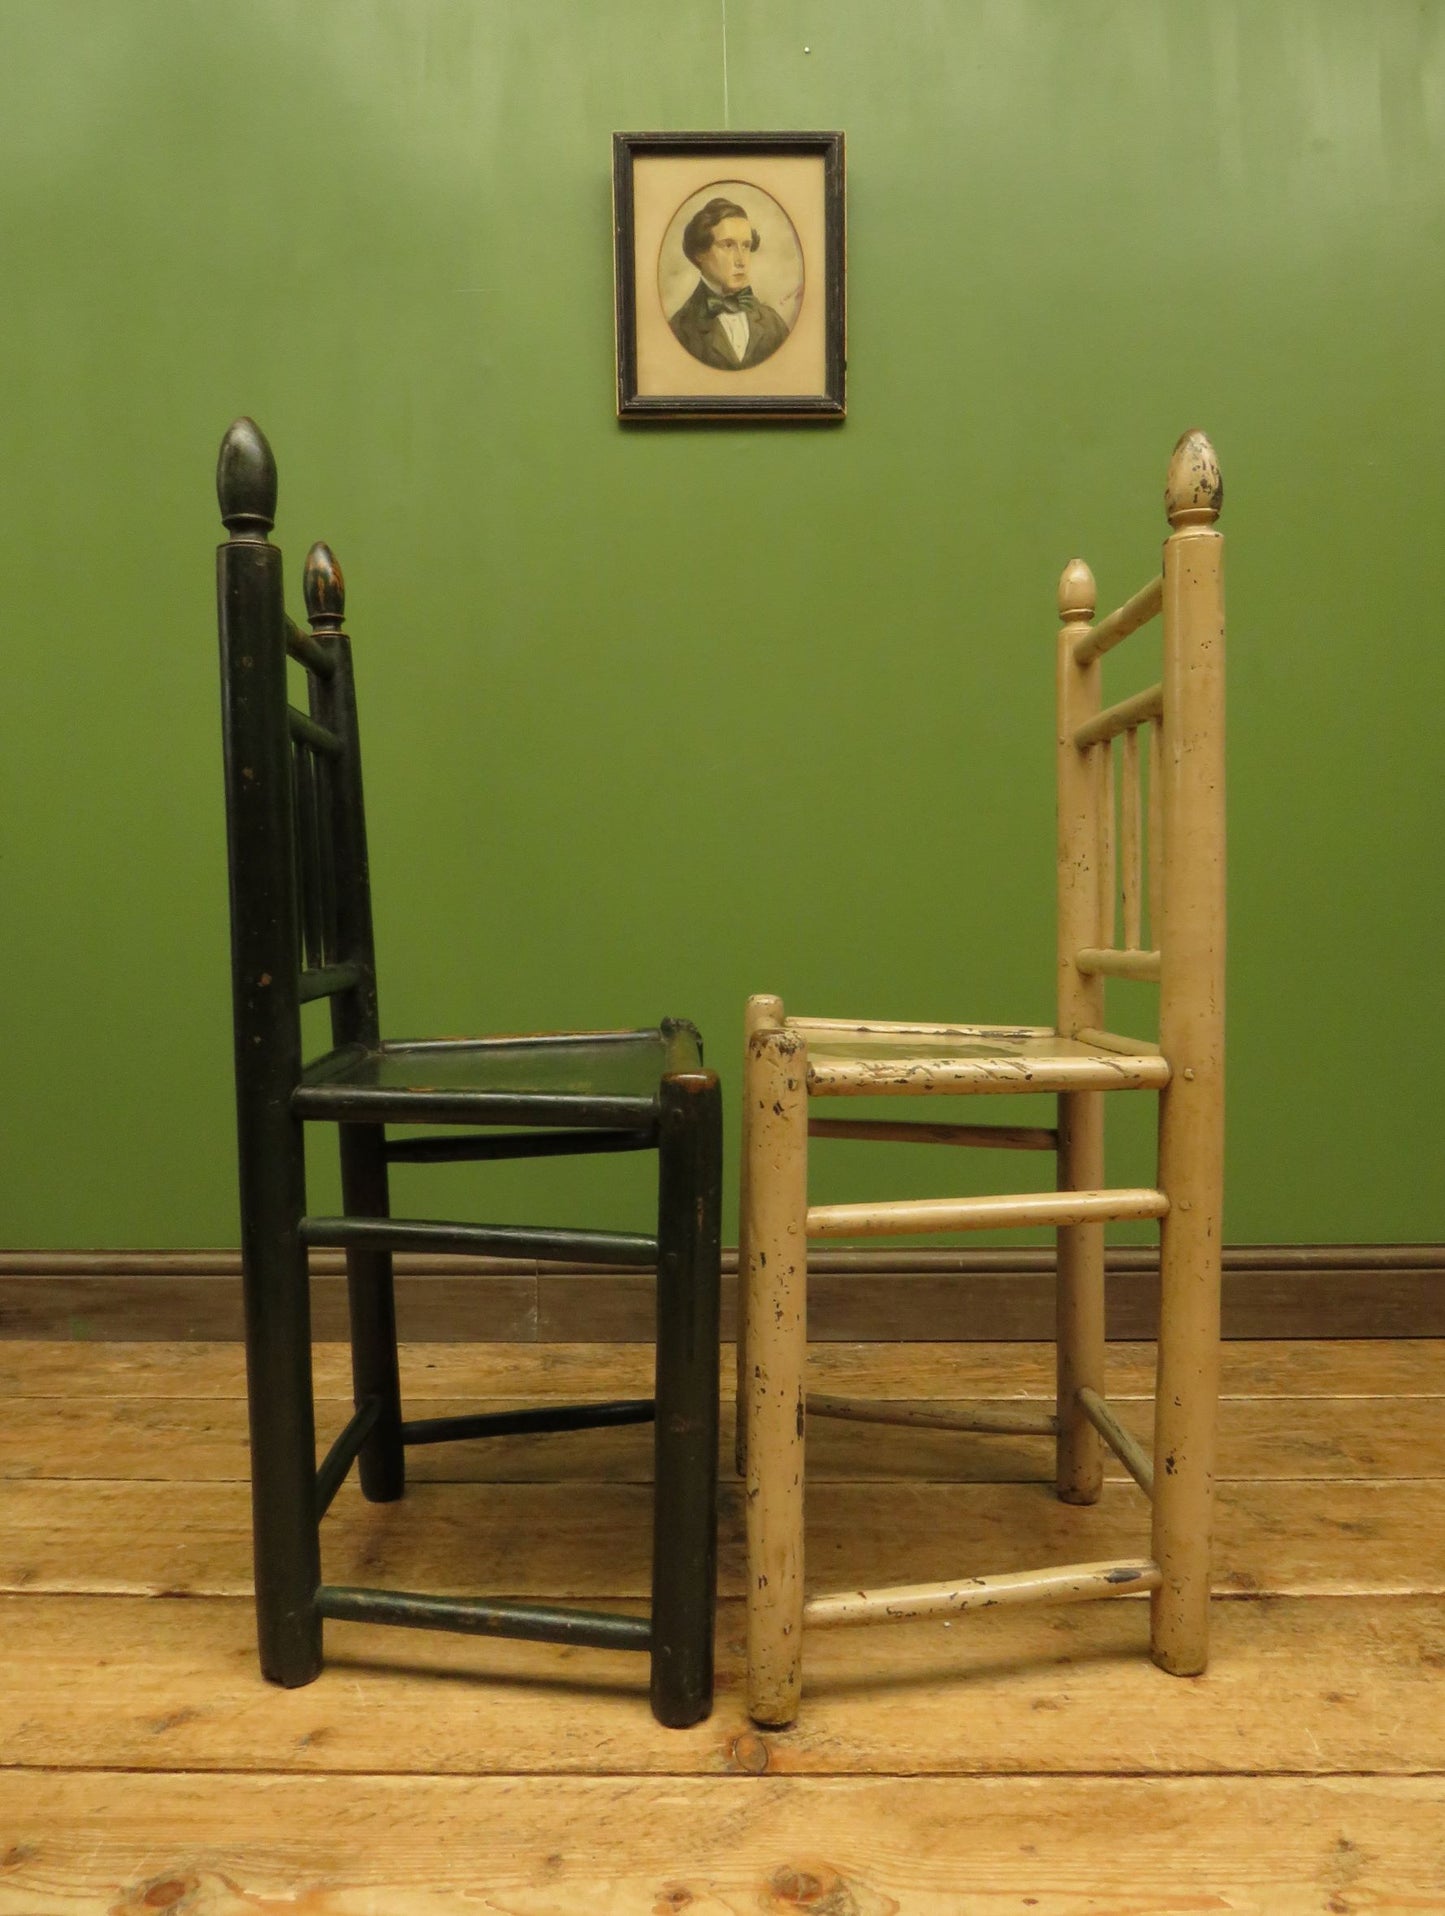 Pair of Old Primitive Spindle Chairs with Aged Painted Finish